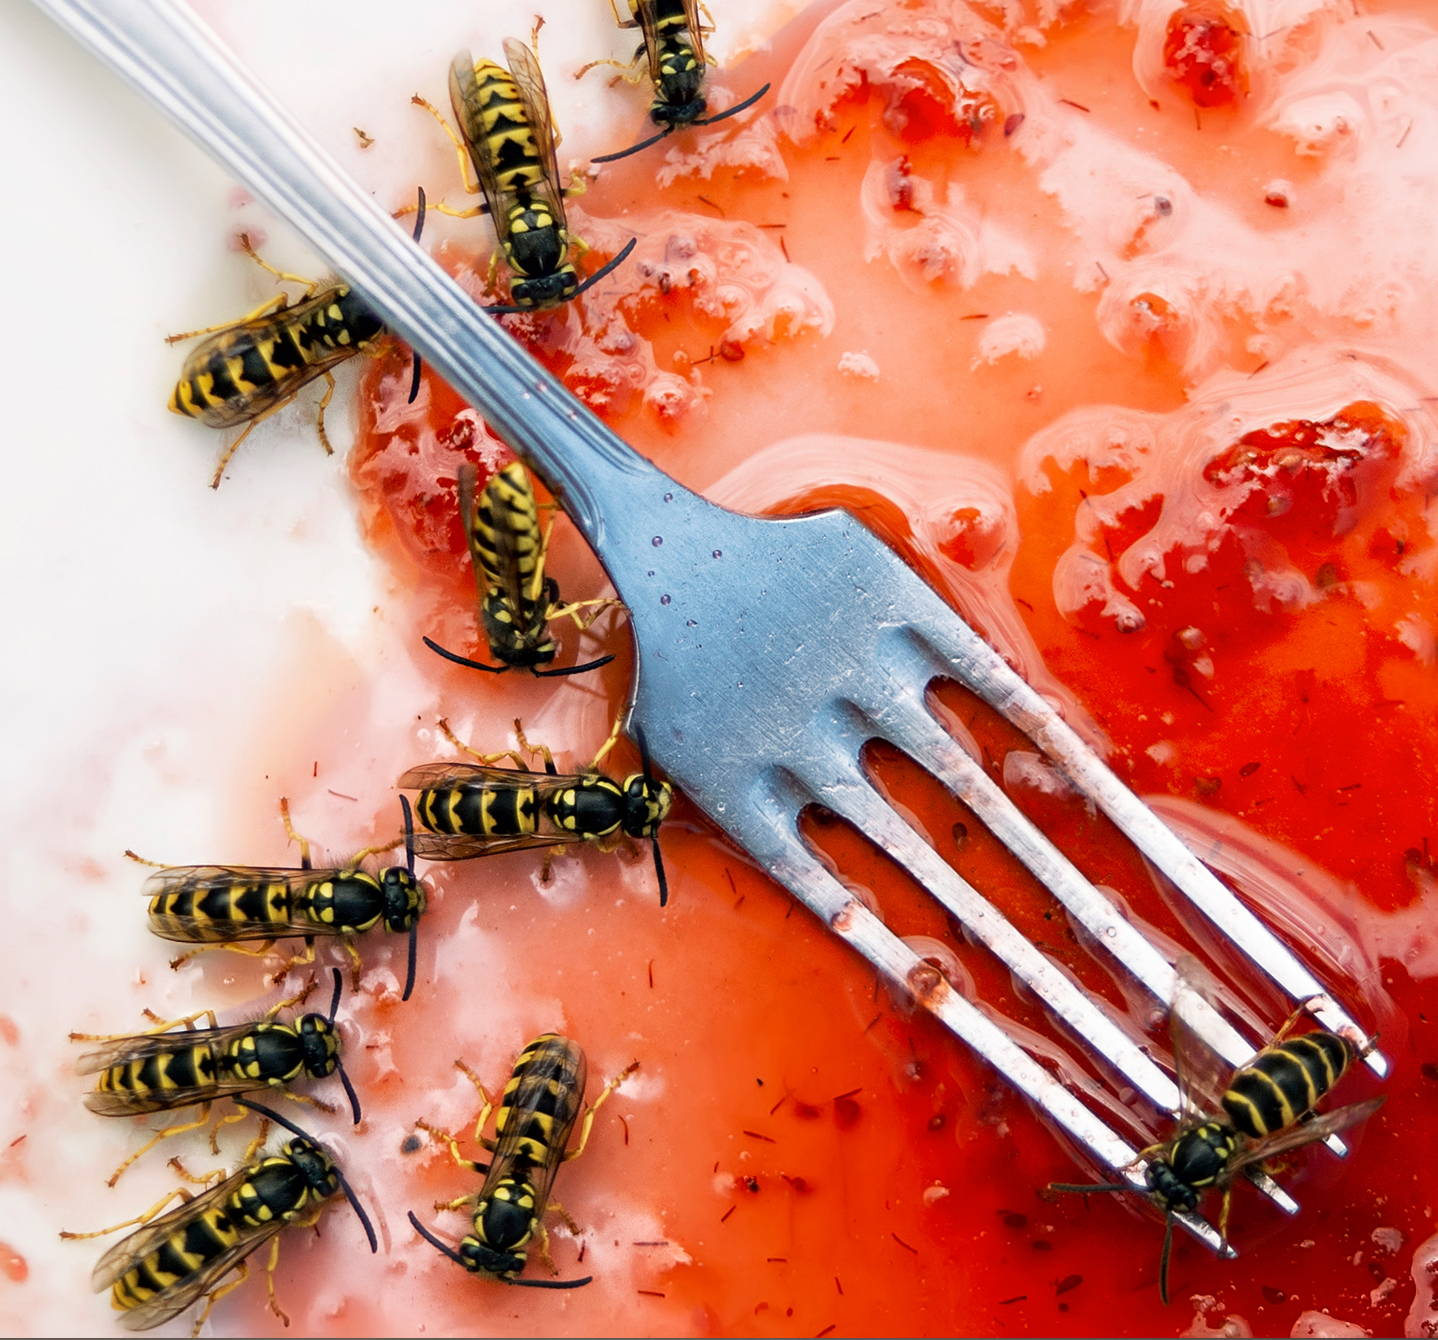 What is wasp allergy? Wasps love sweet food like strawberry and may sting if waved away, giving some people allergy symptoms